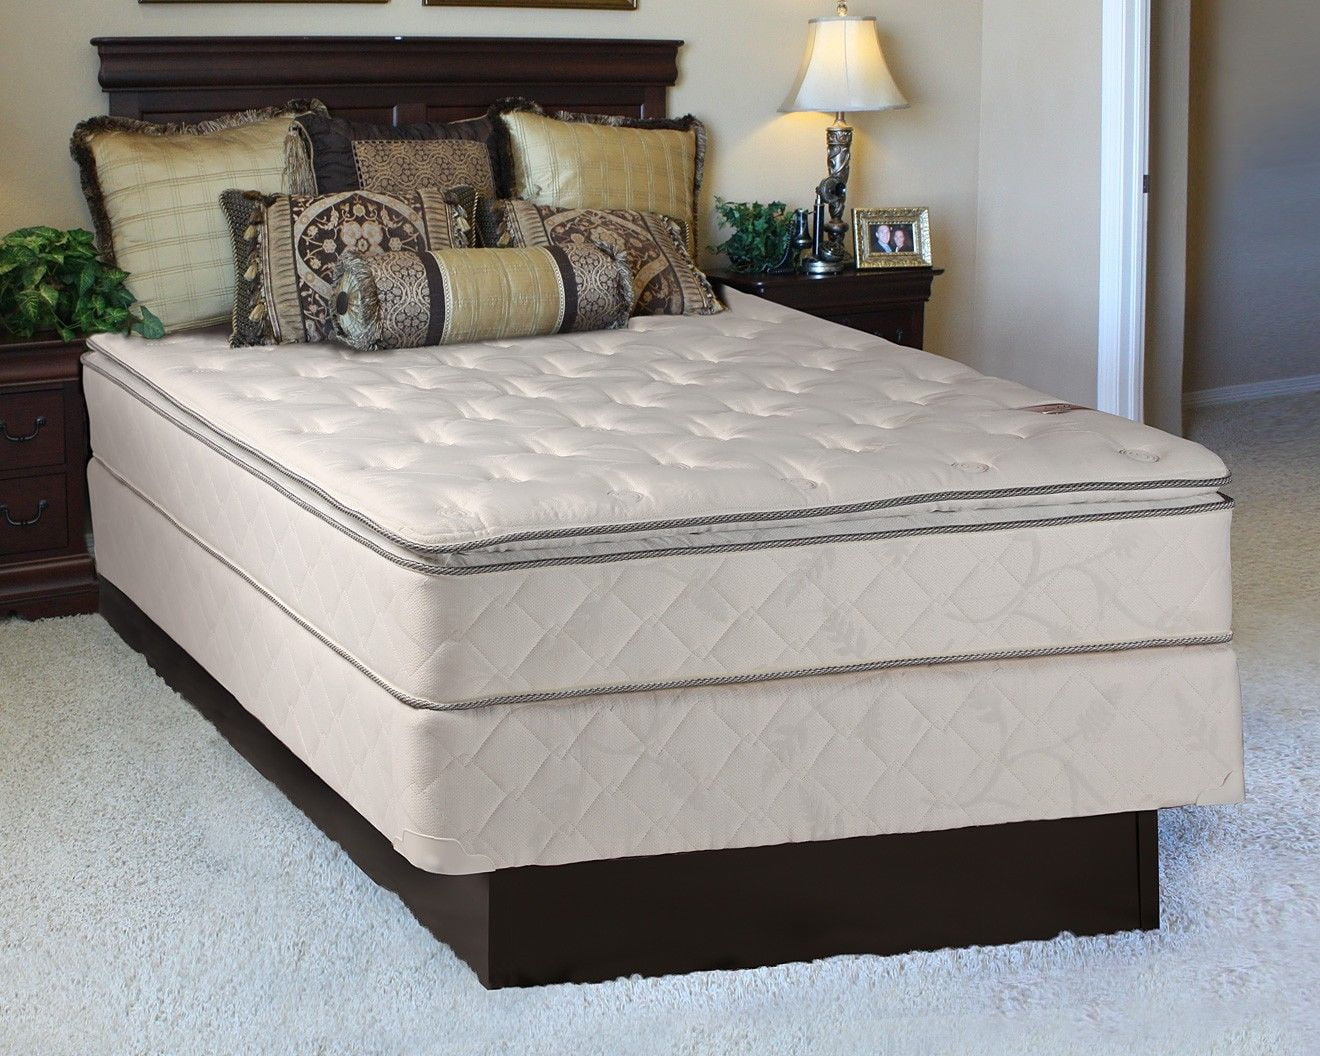 walmart mattress and box spring for sale